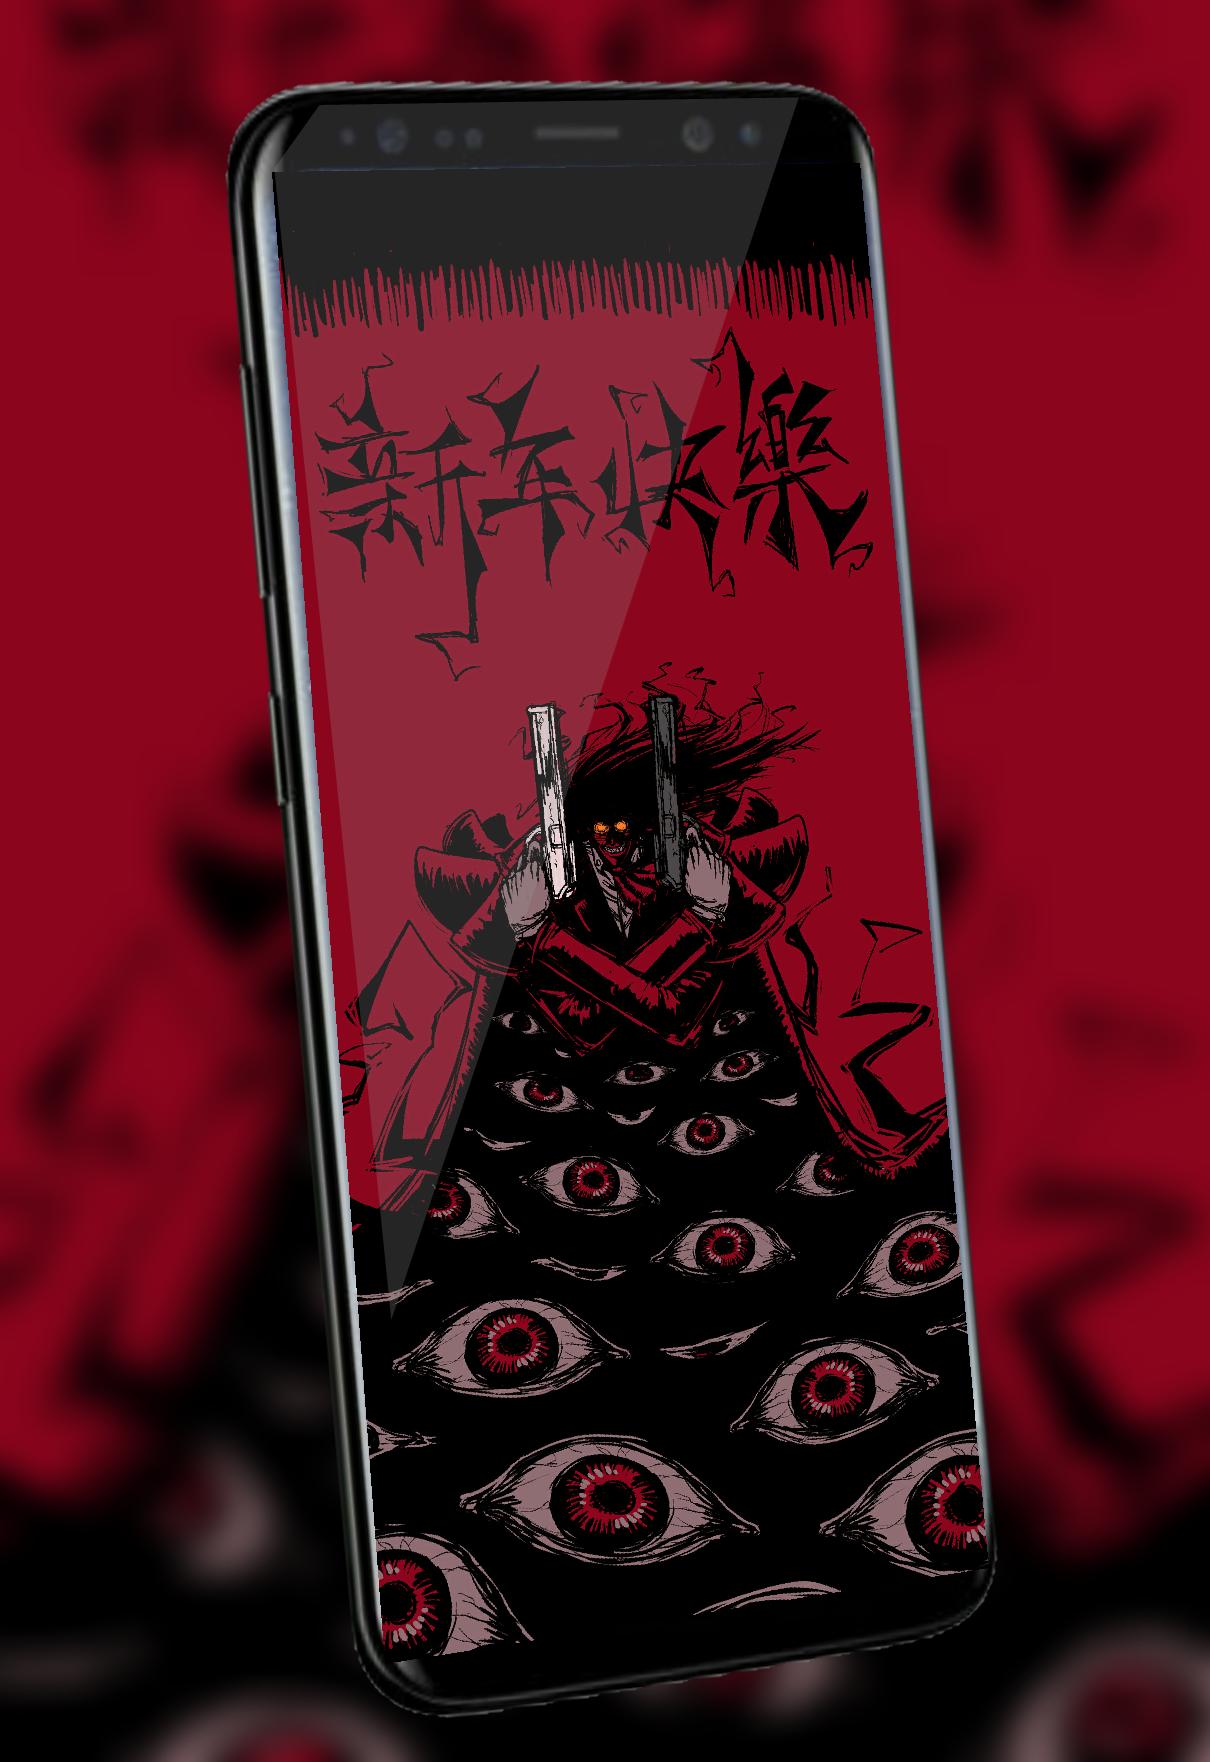 Hellsing Ultimate Wallpaper For Android Apk Download